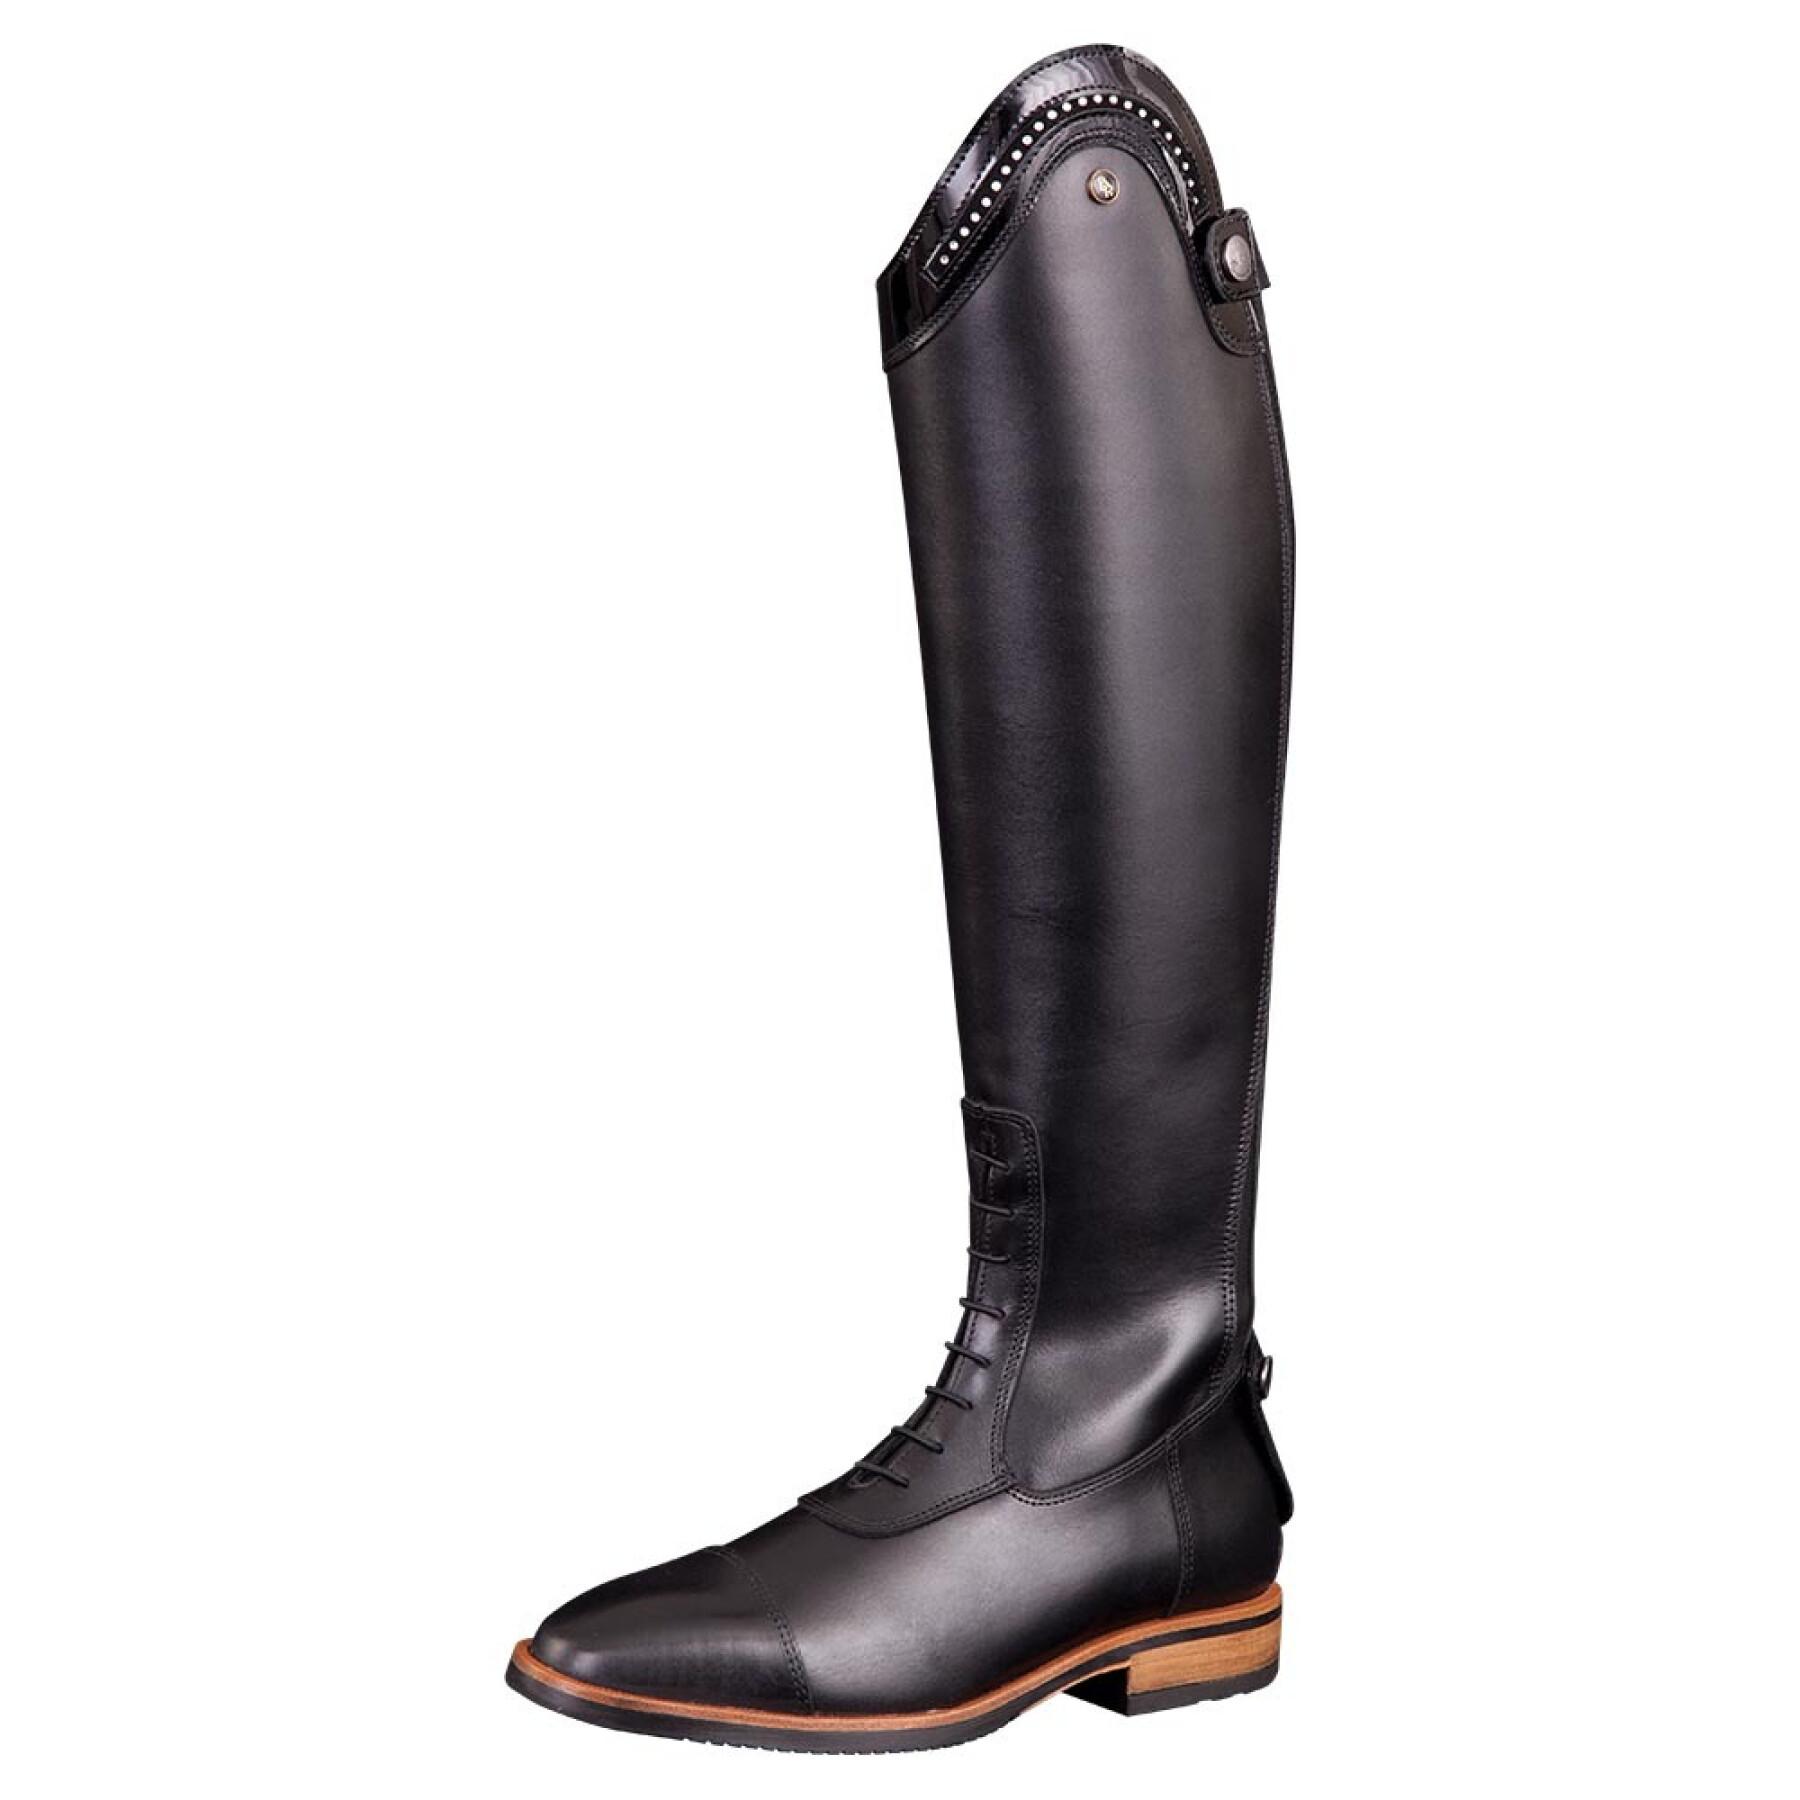 Wide calf leather riding boots BR Equitation Venetia